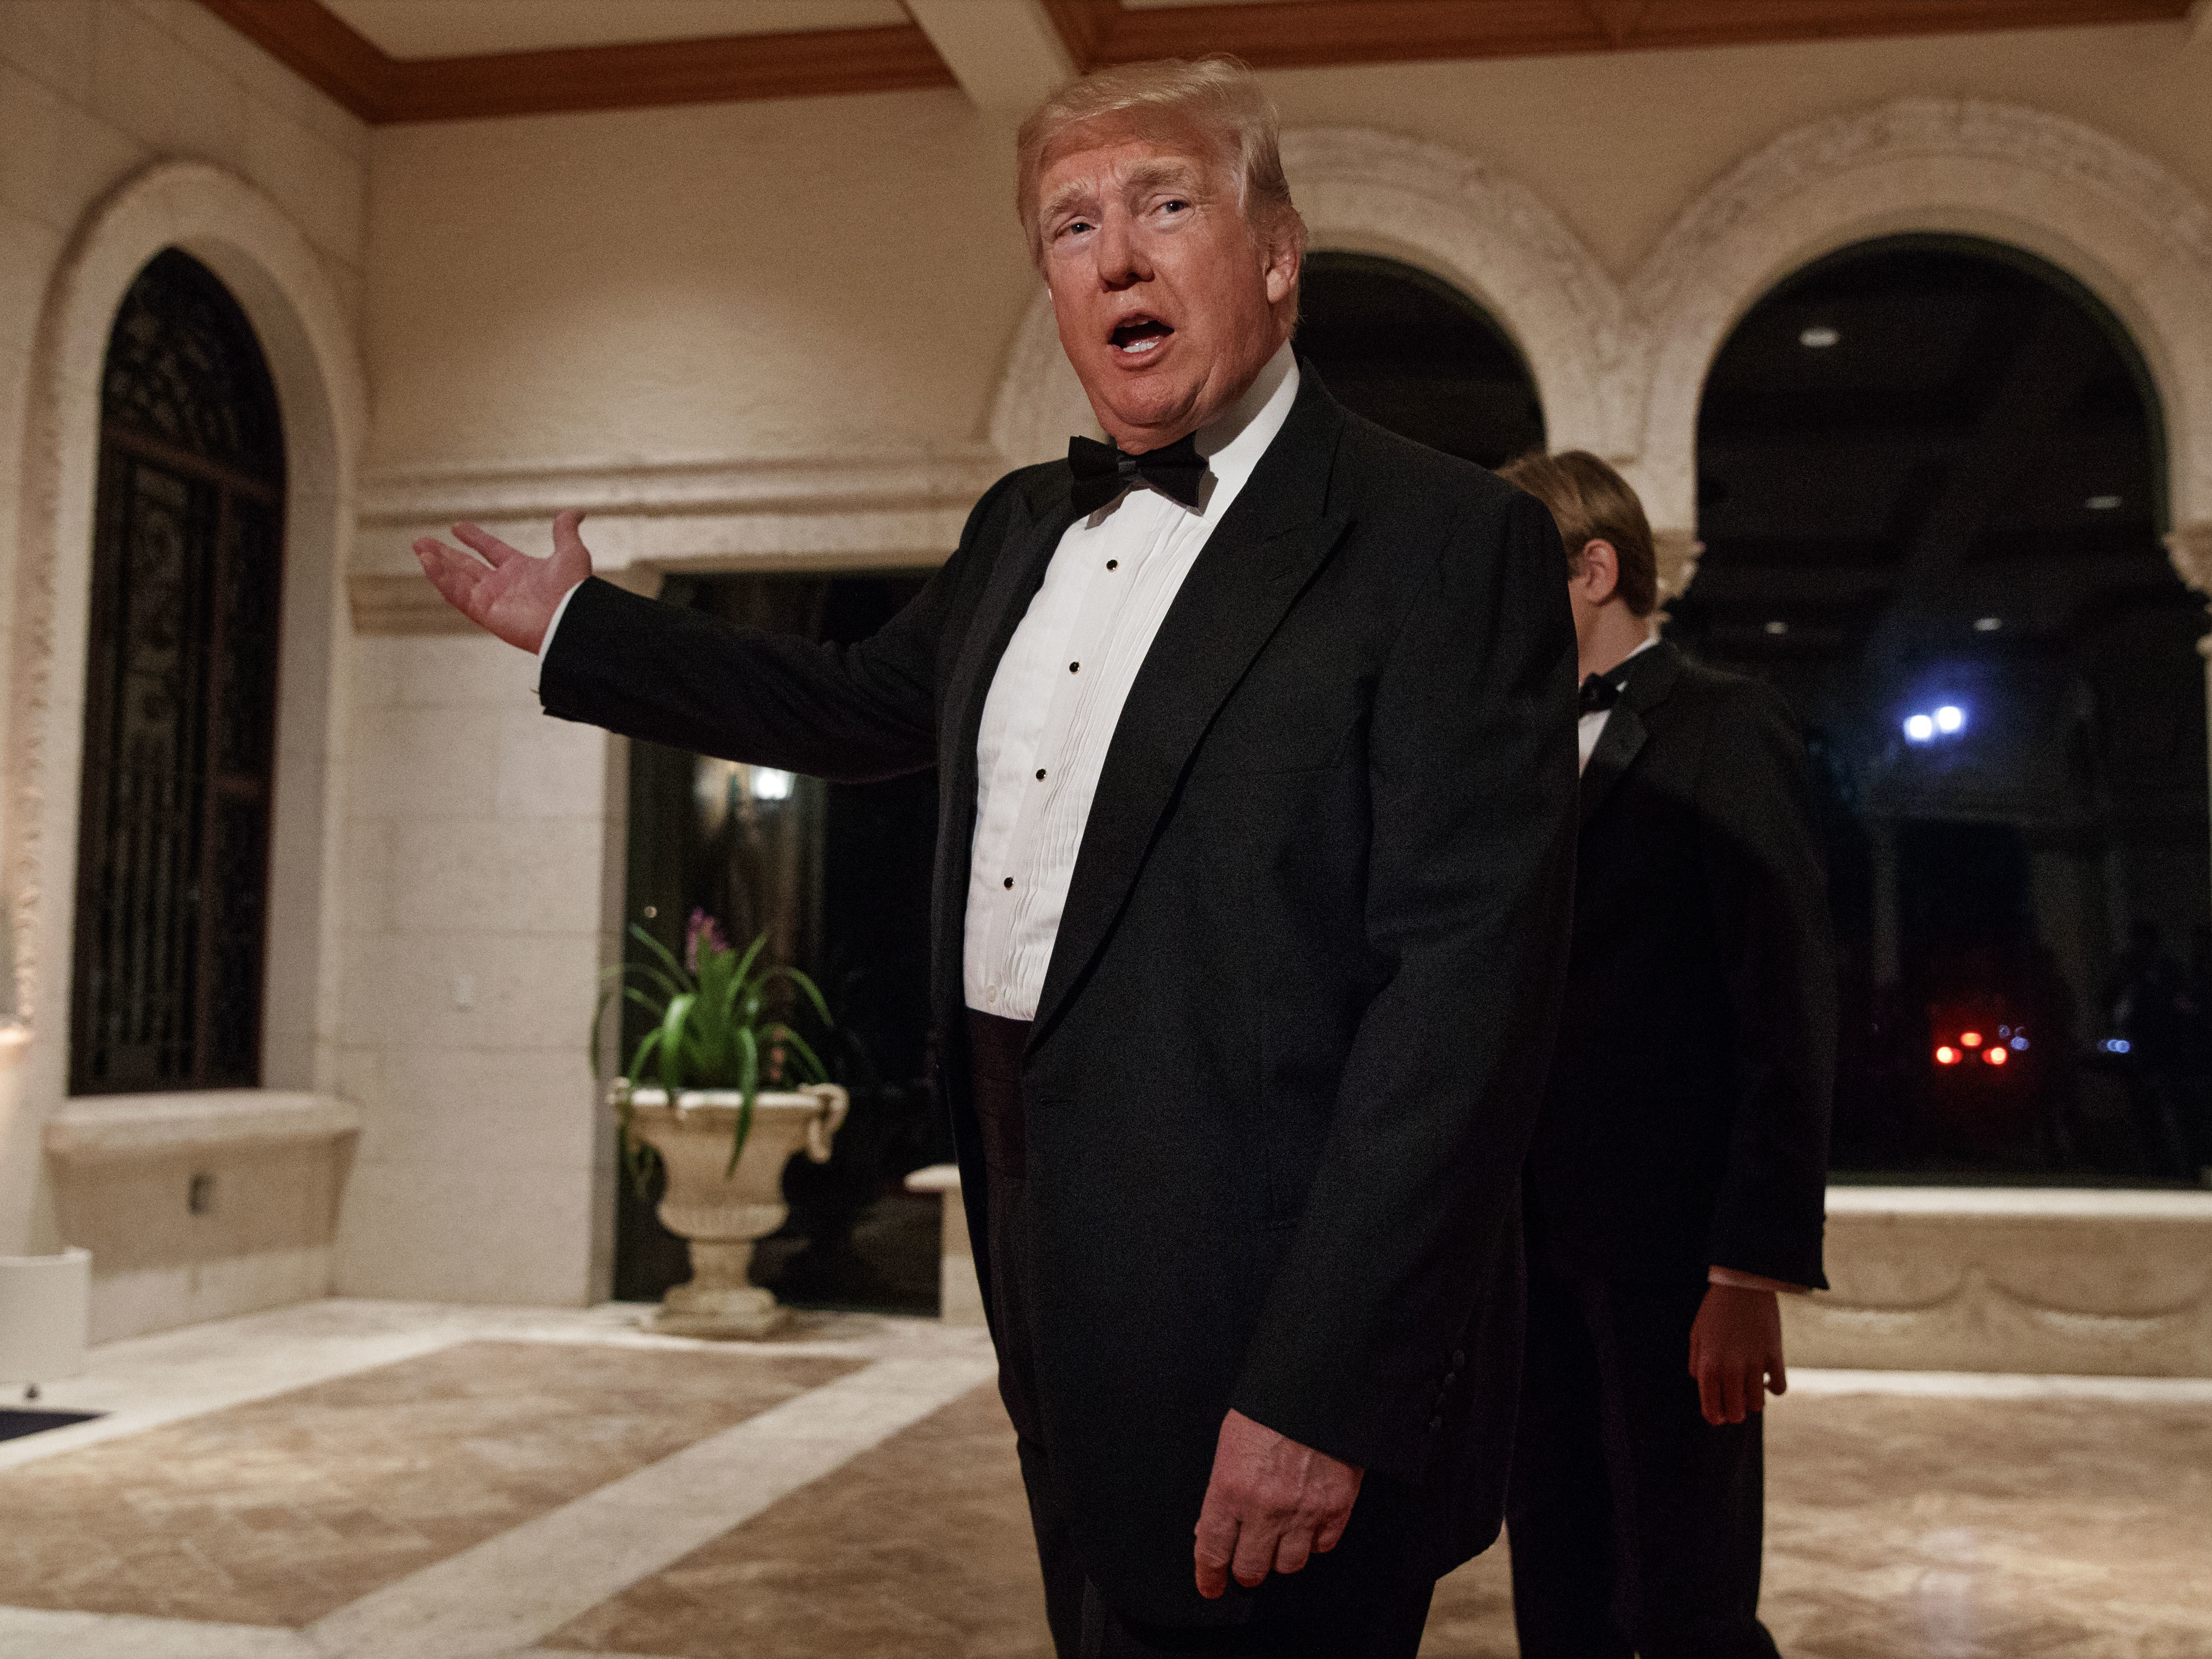 President Donald Trump speaks with reporters as he arrives for a New Year's Eve gala at his Mar-a-Lago resort, in Palm Beach, Fla., on Sunday.